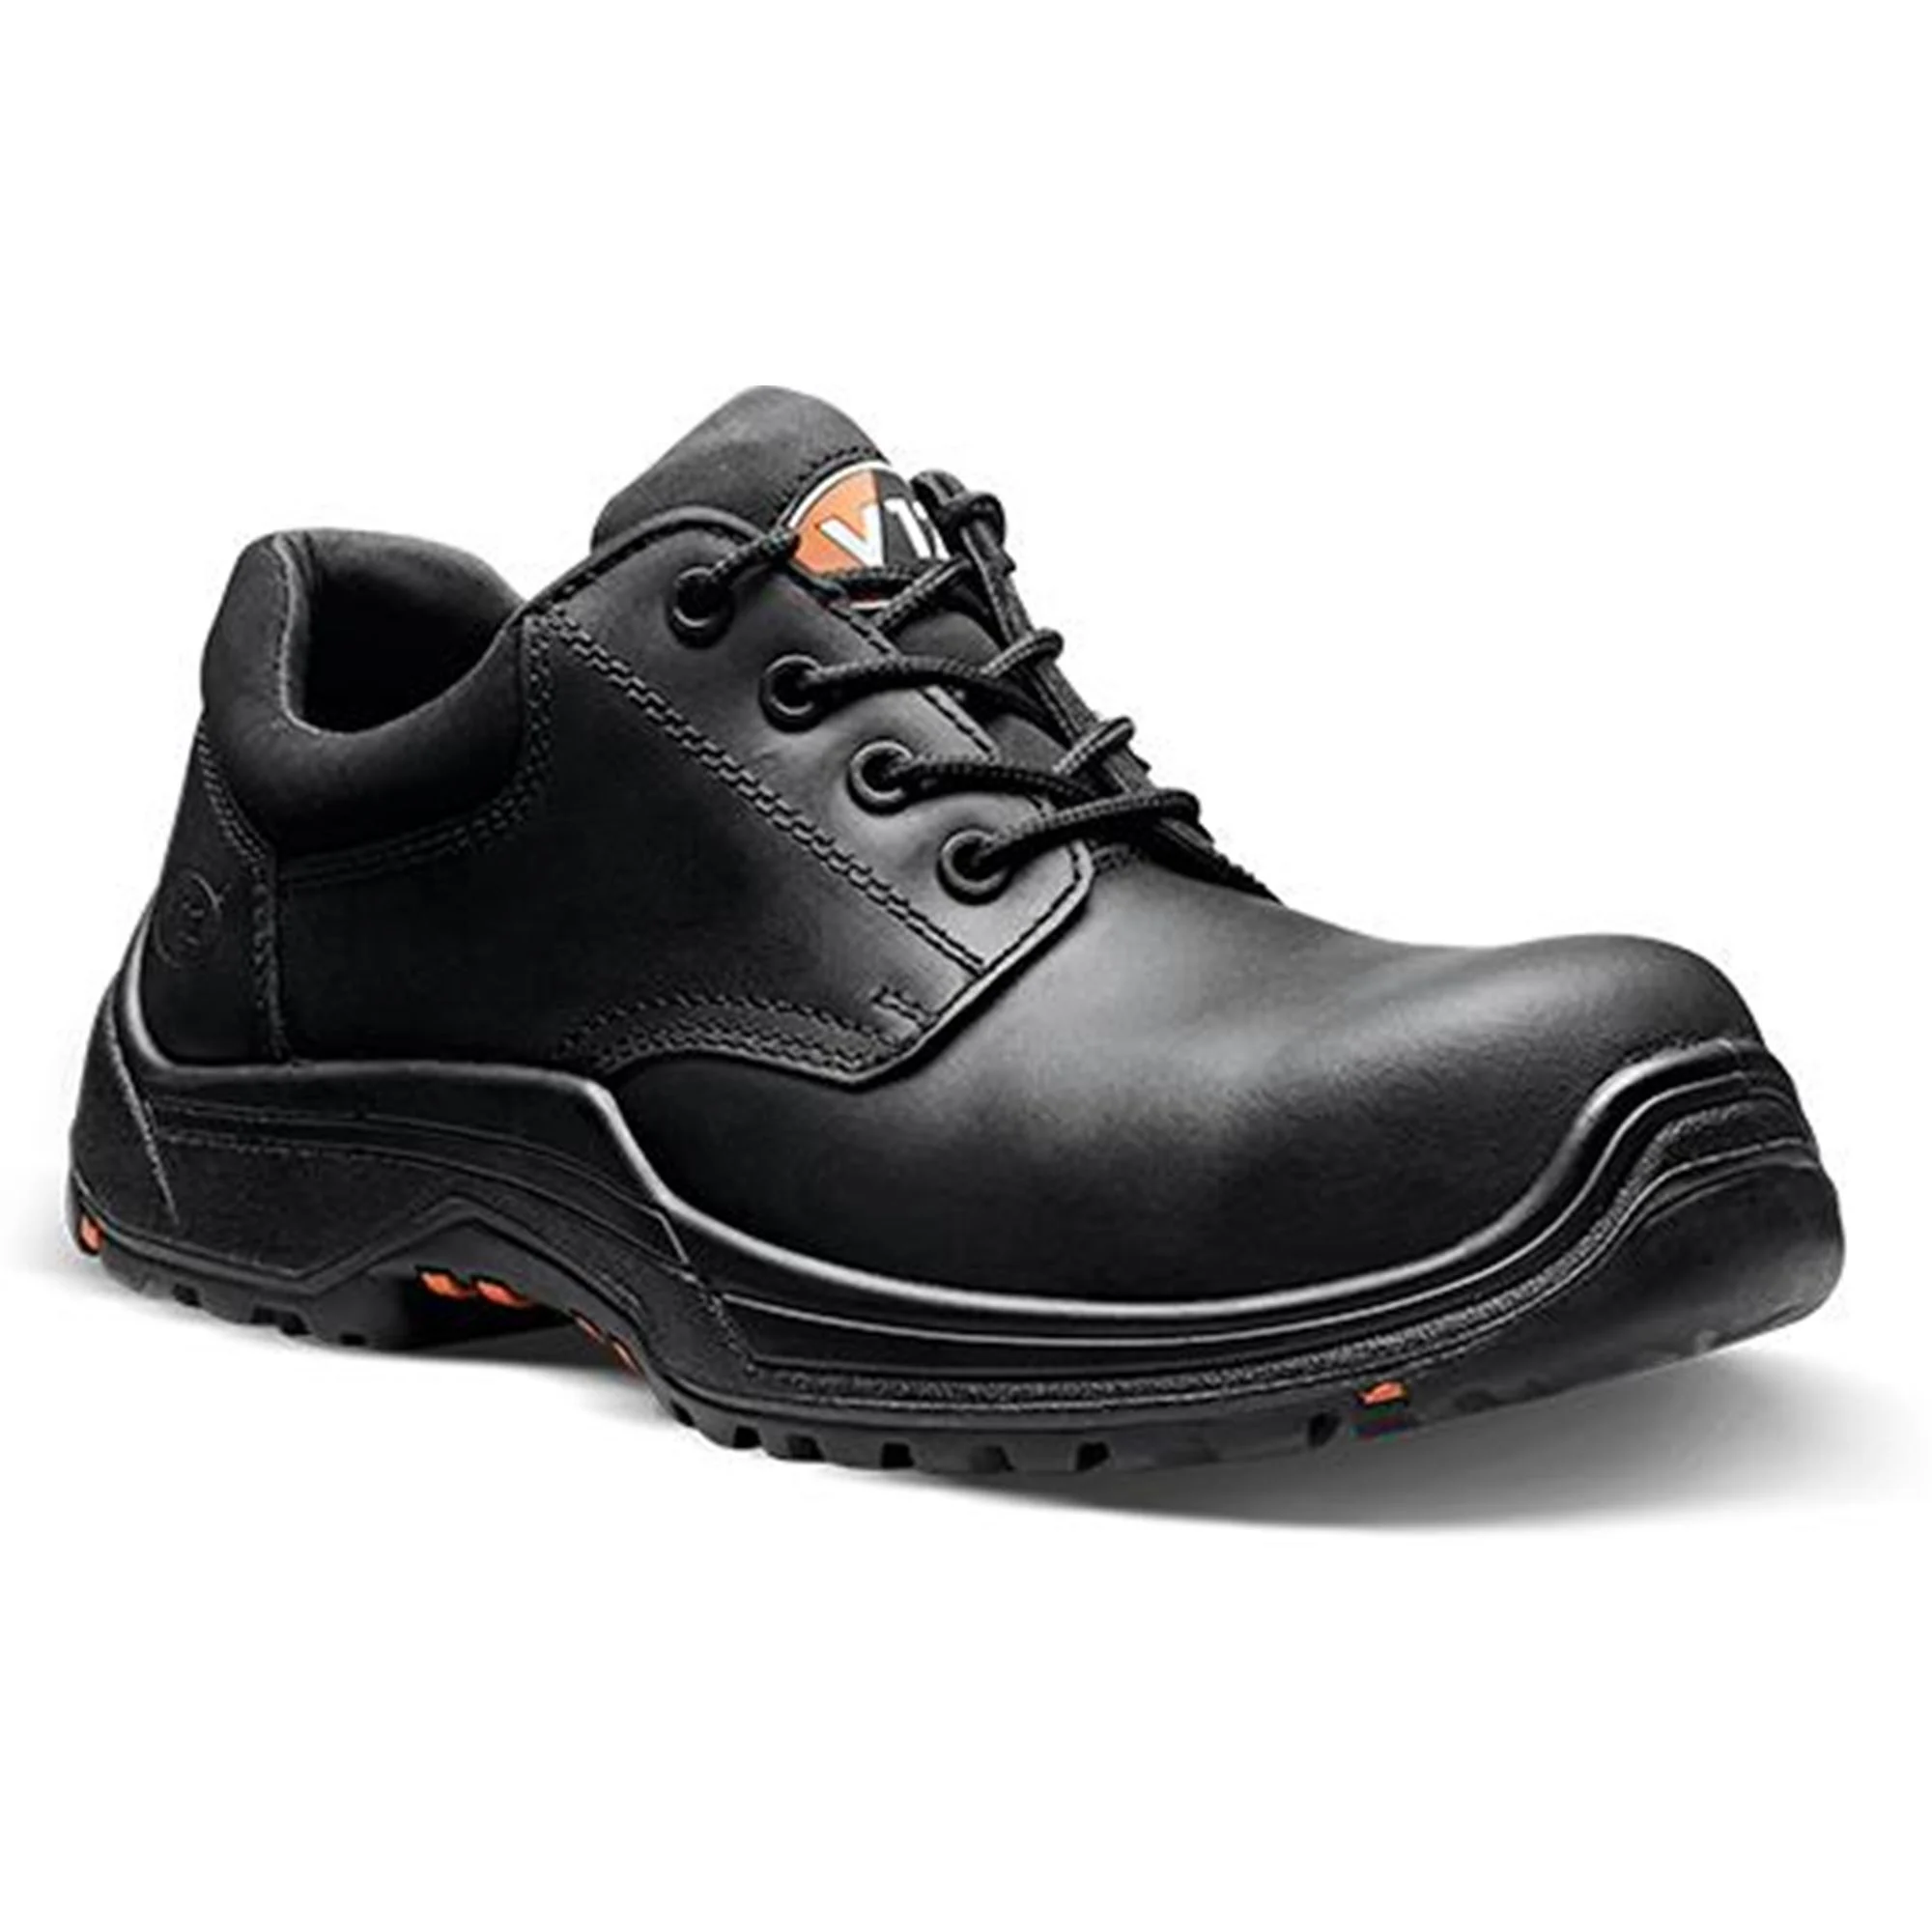 Safety Shoes Size 45 High Cut image 1